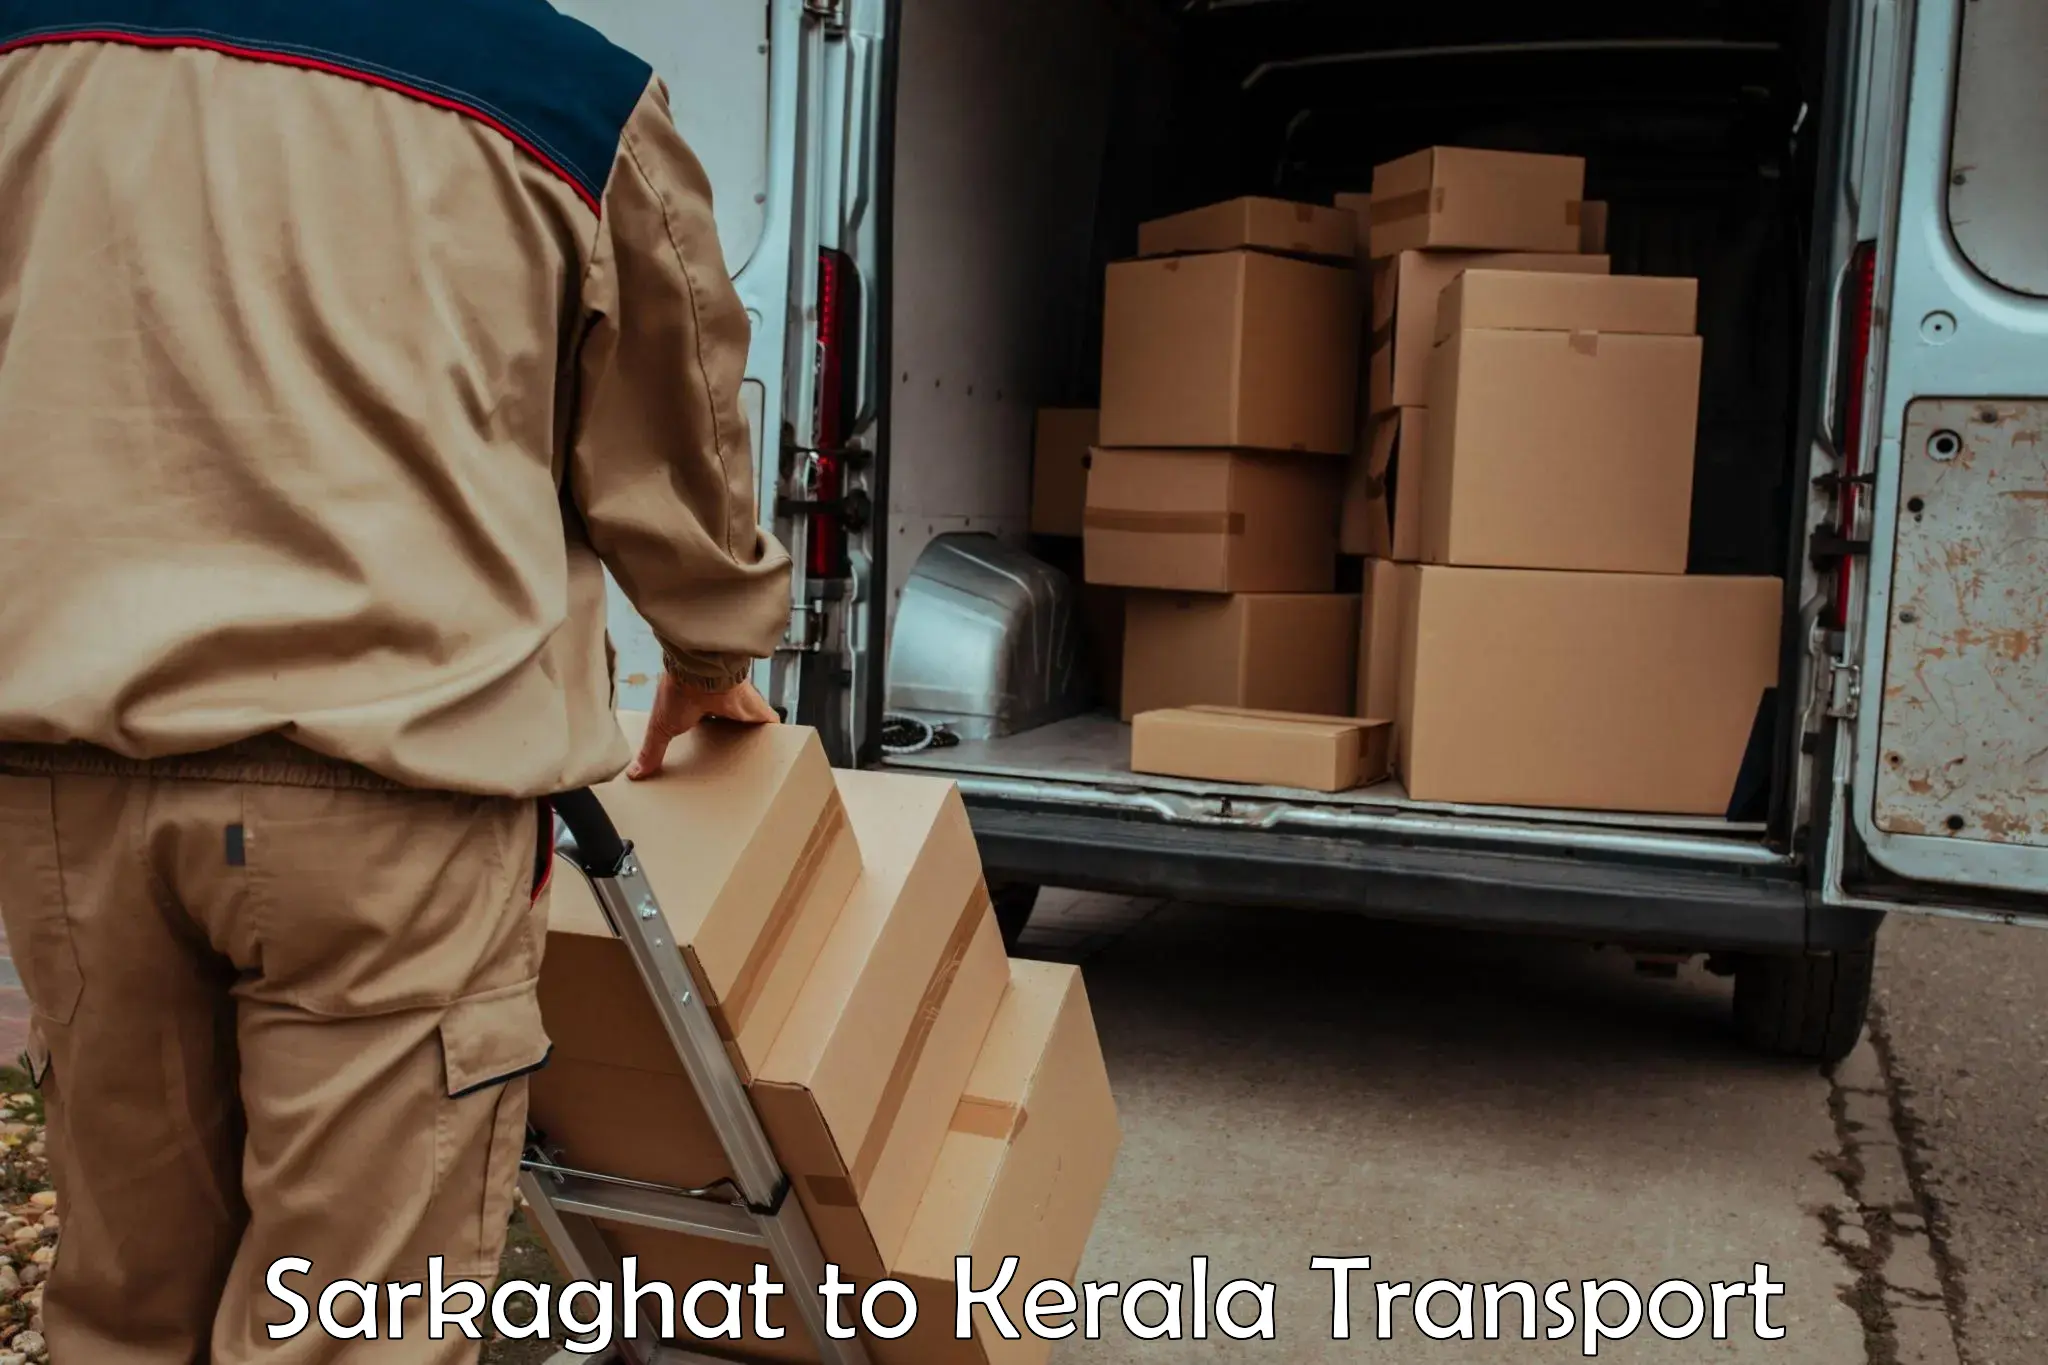 Lorry transport service Sarkaghat to Perinthalmanna